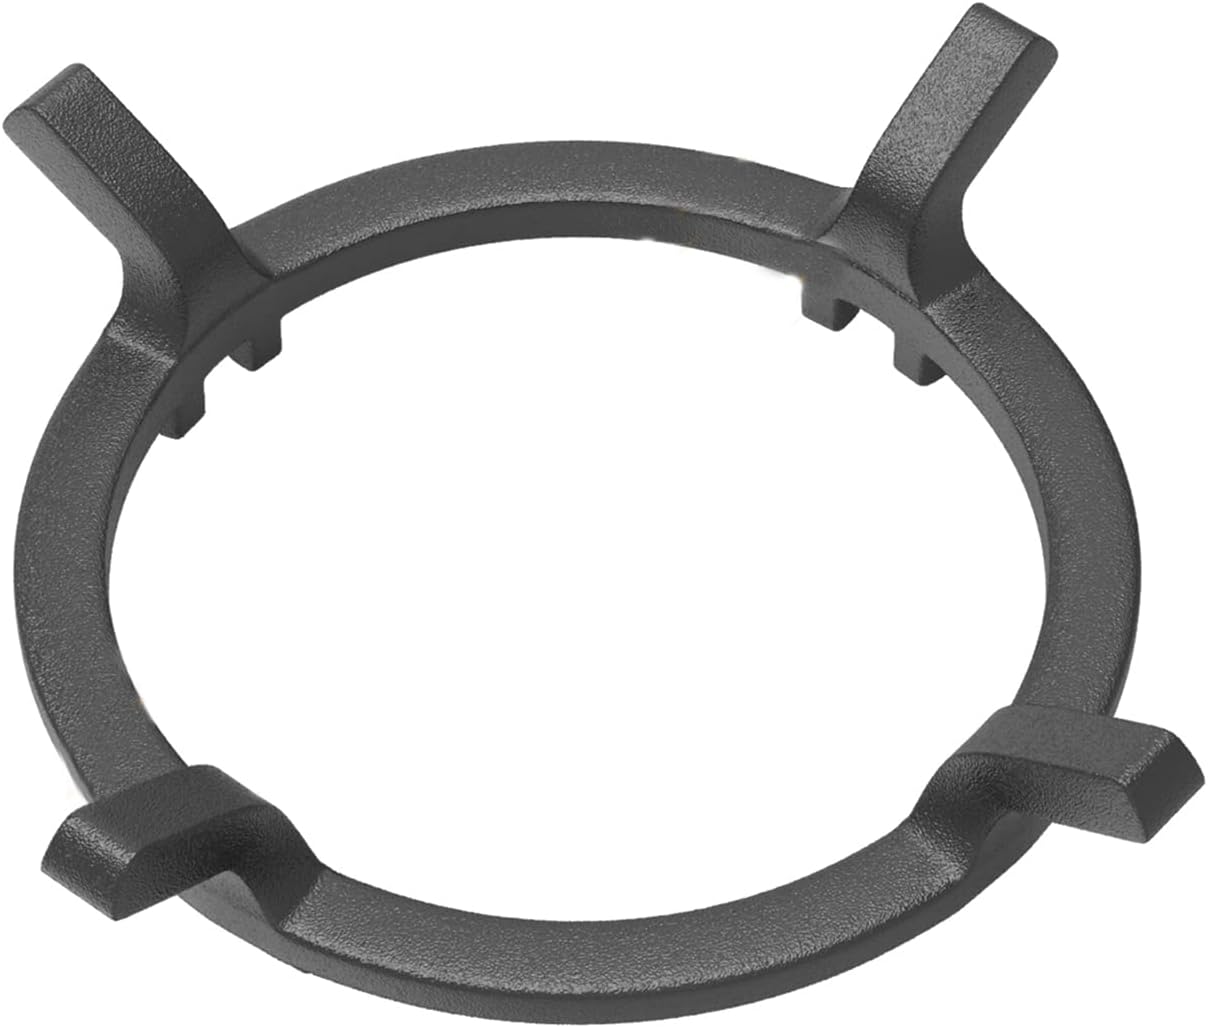 Generic Cast Iron Wok Ring,Replacement Wok Stand Parts for GE Cooktop,Kitchenaid,whirlpool,Jenn-Air Kitchen,Samsung Etc Range Gas Stove